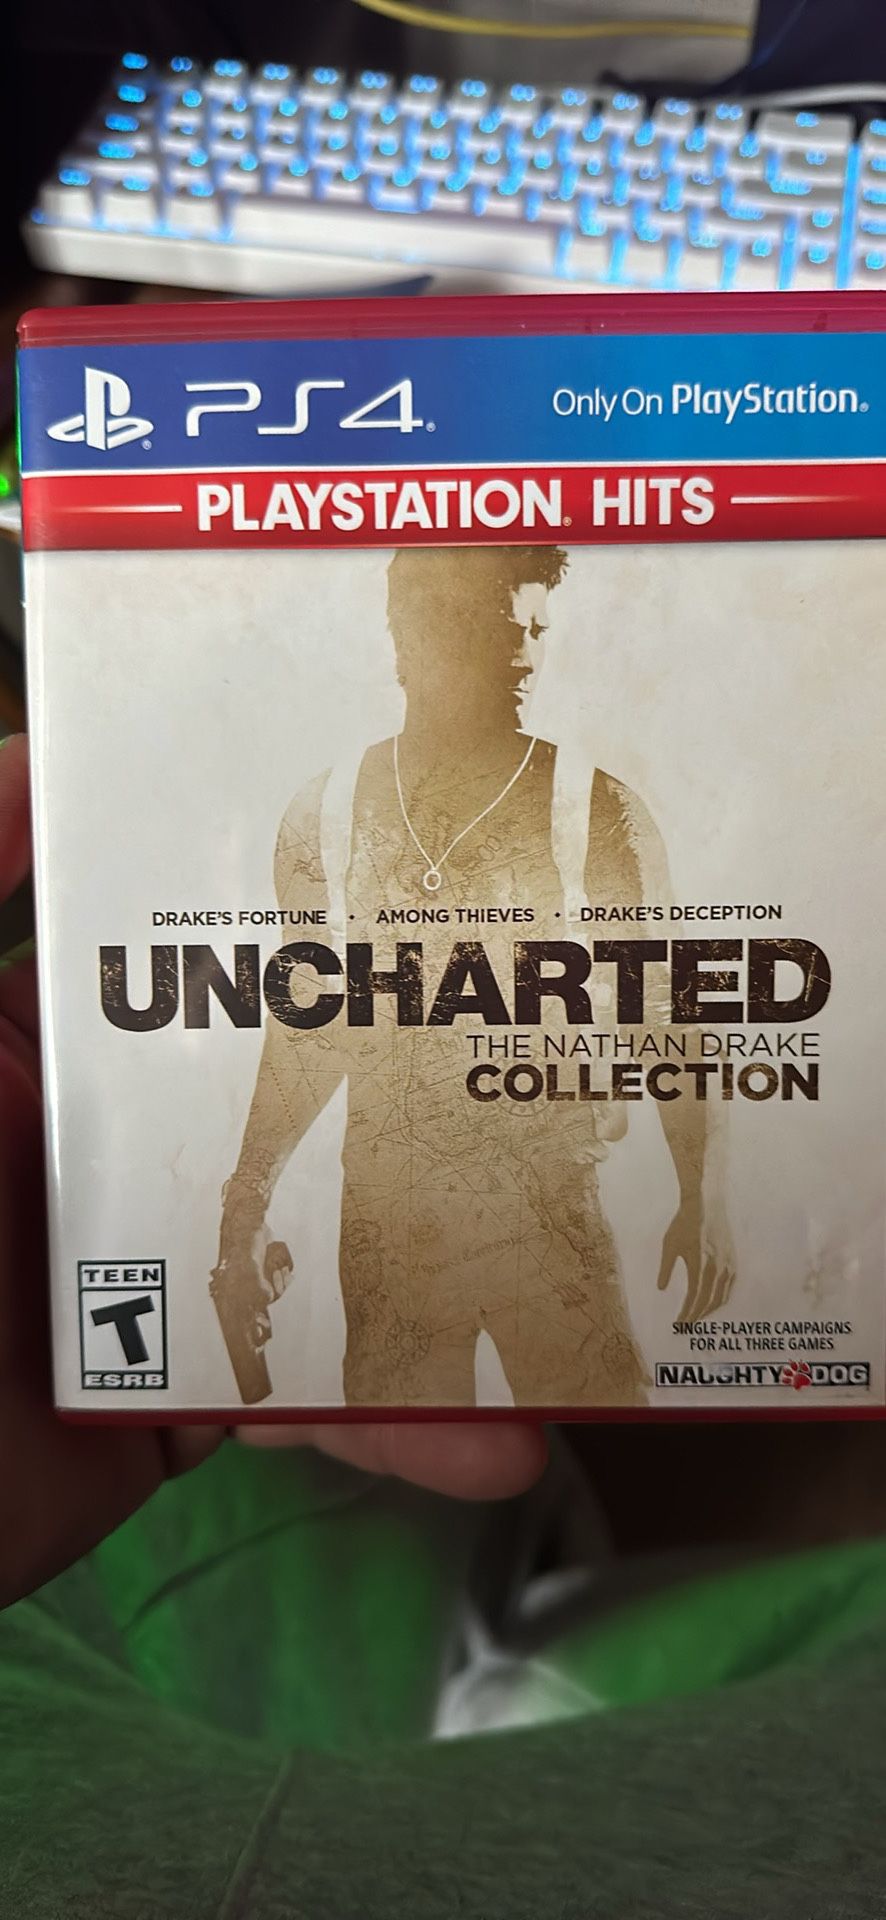 Uncharted The Collection/ Uncharted 4